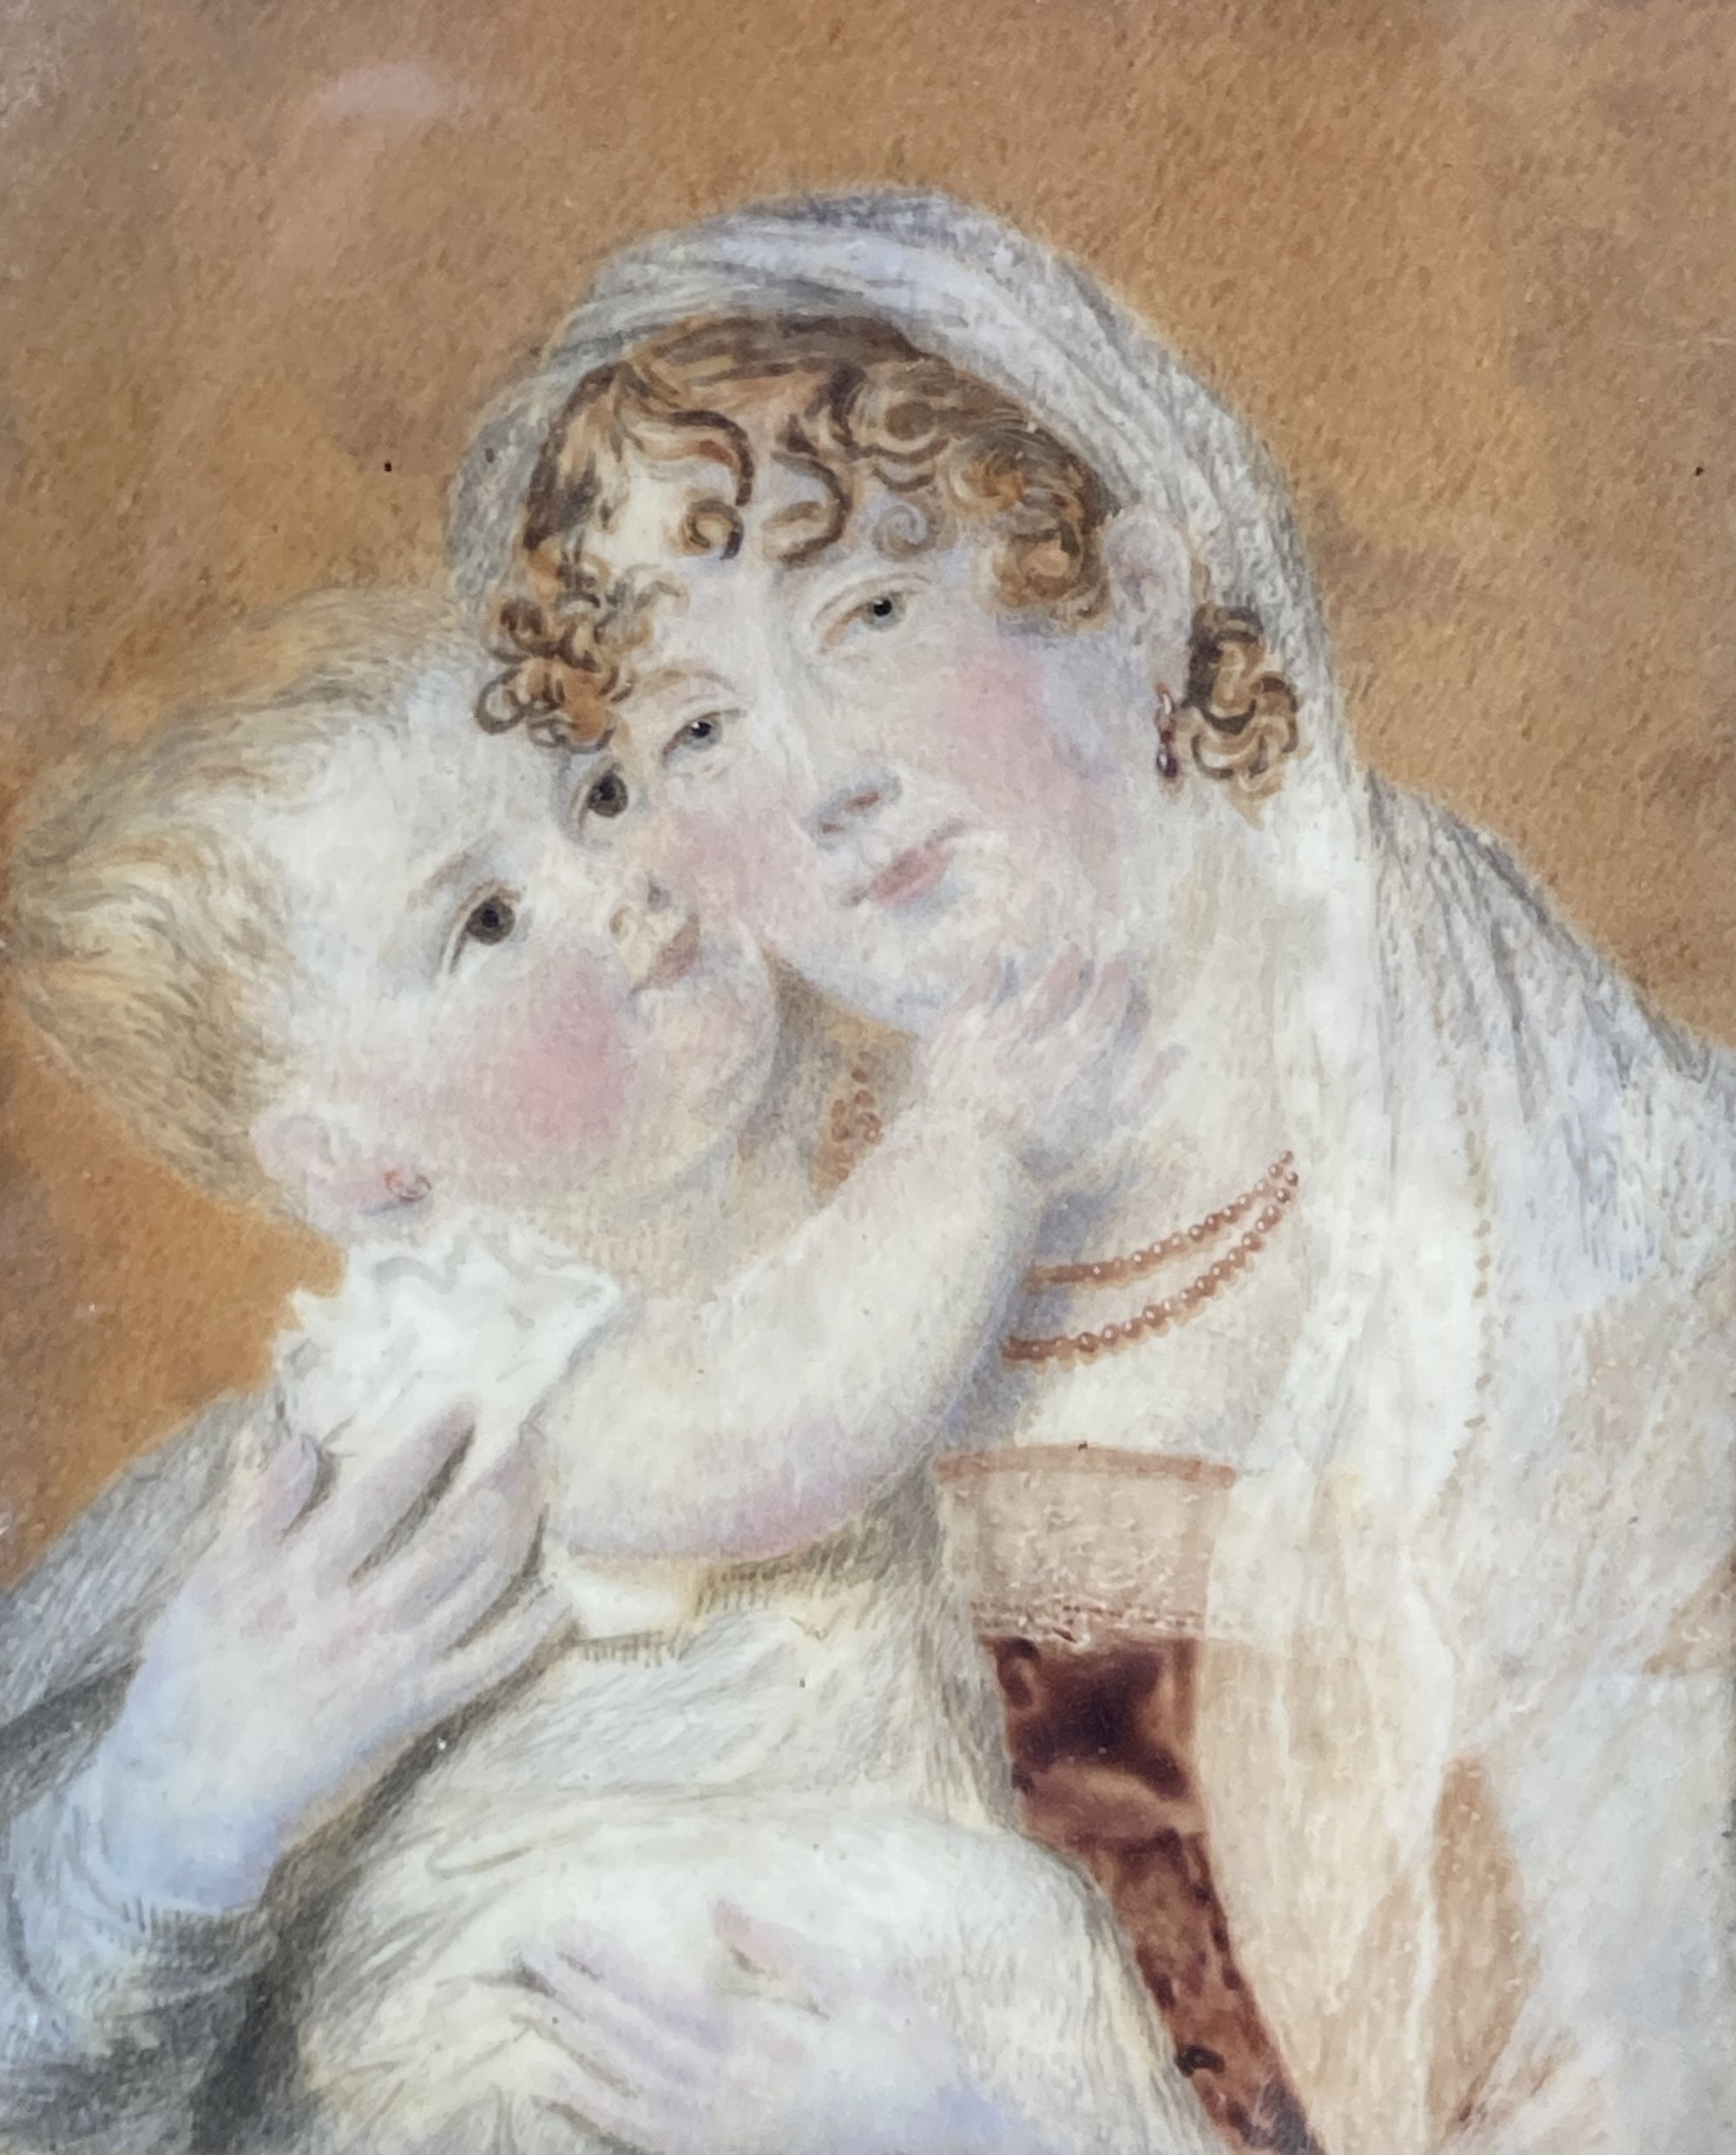 19th century English School, oil on ivory, Miniature portrait of a mother and child, 8.5 x 6.5cm, housed in an ornate gilt gesso frame,